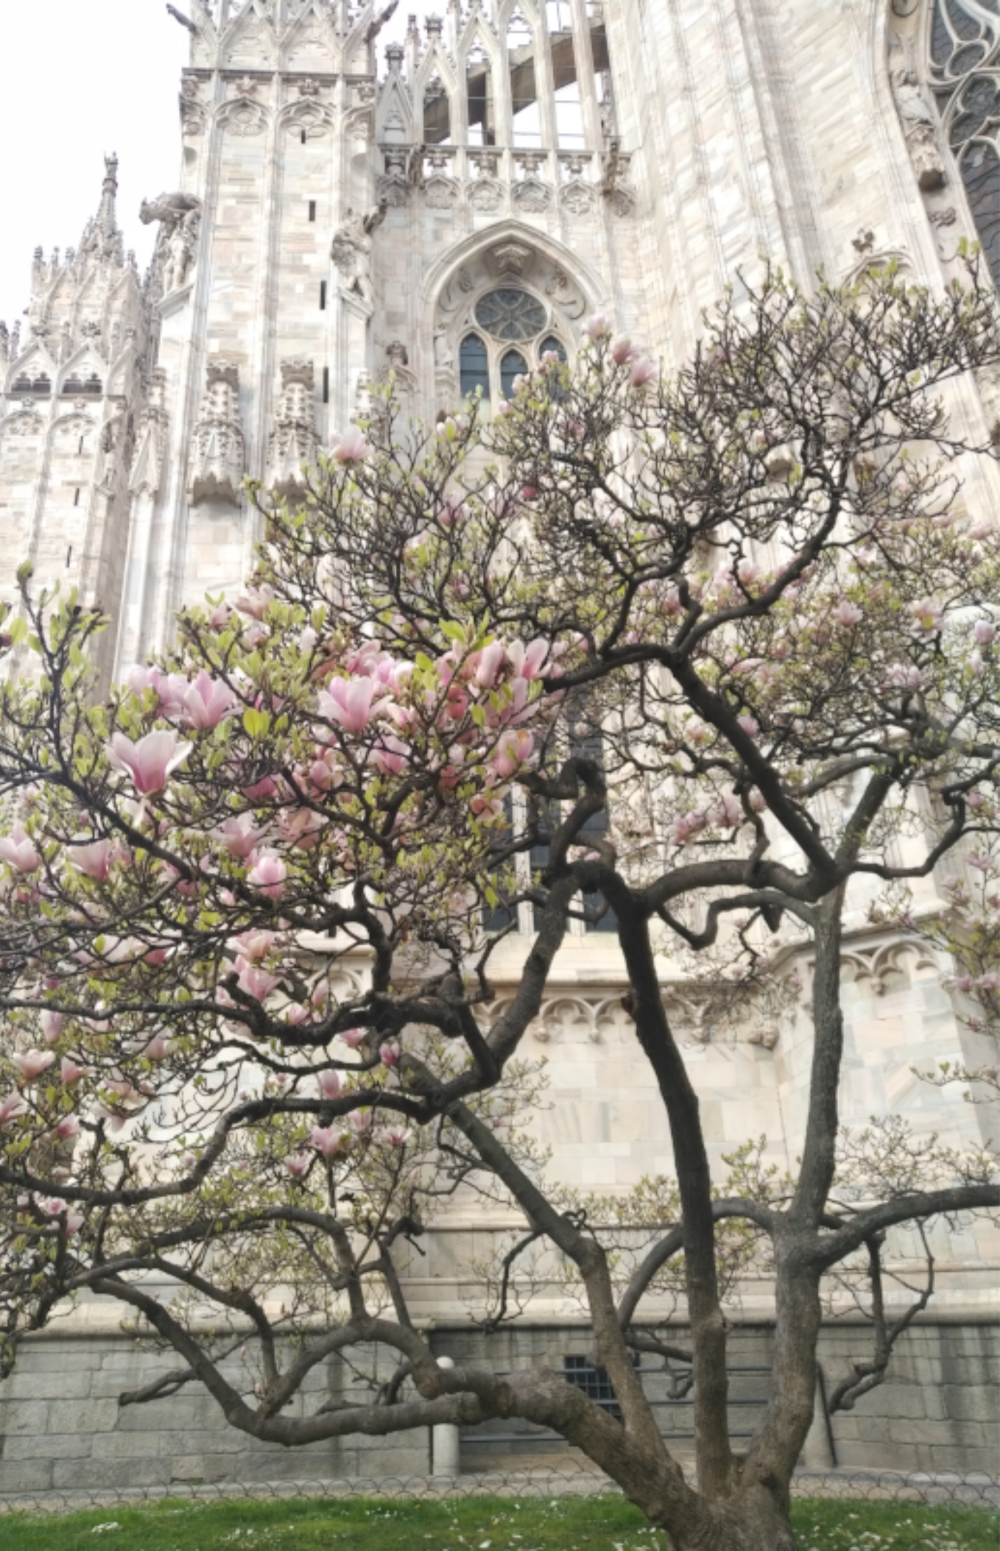 Tree blossom in front of Milan's cathedral Spring 2020, the author's image